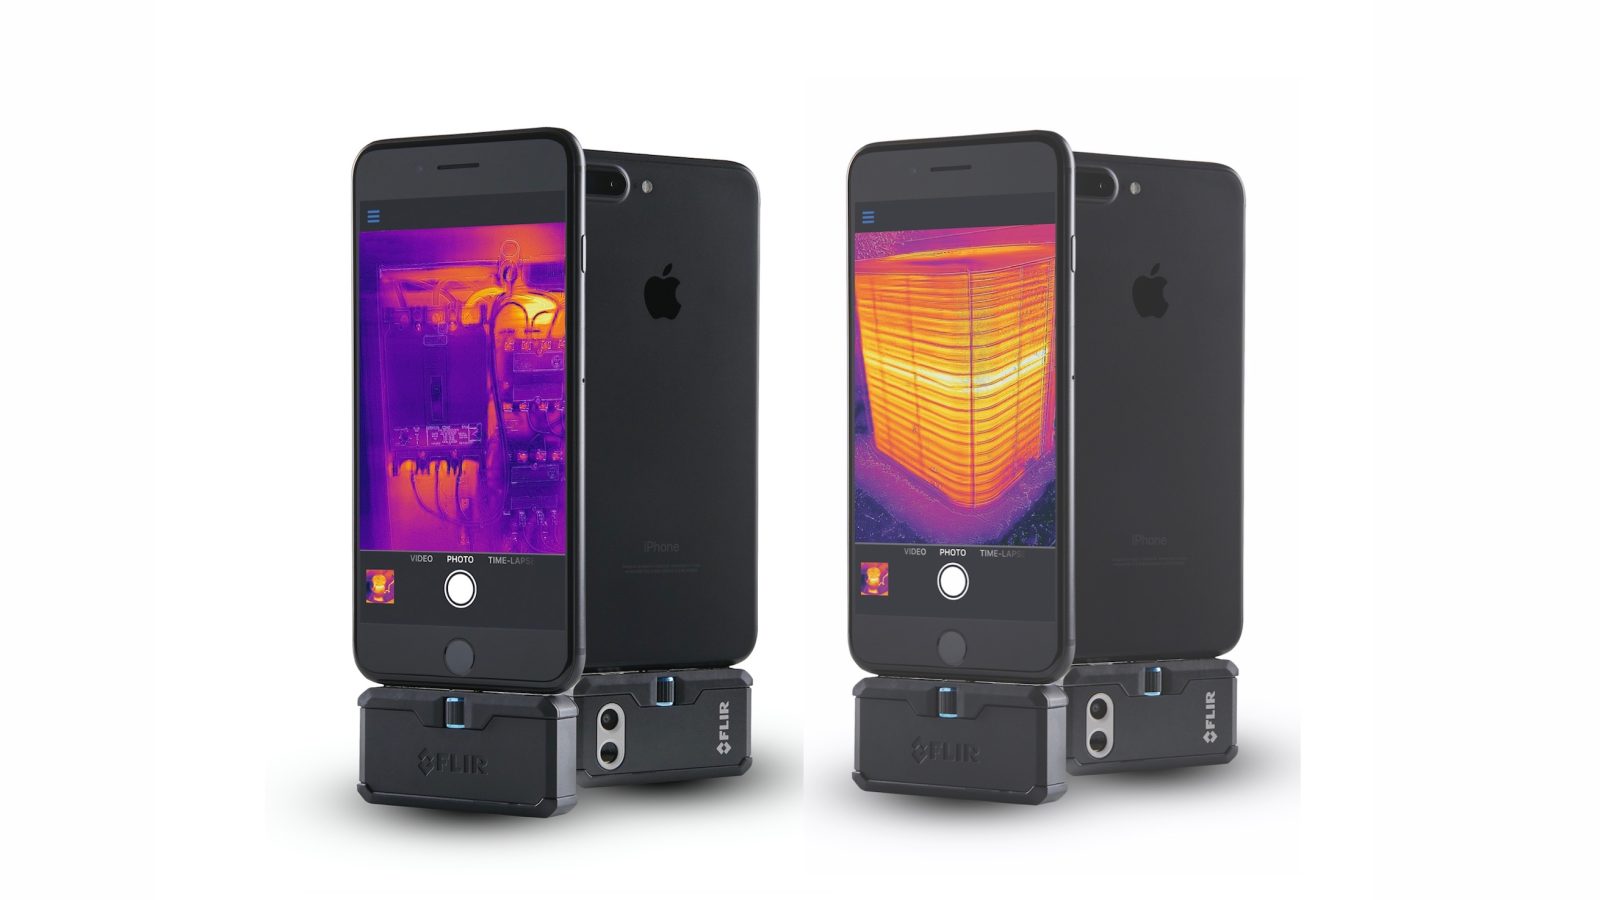 photo of Flir unveils One Pro LT thermal image camera for iPhone with more affordable price image